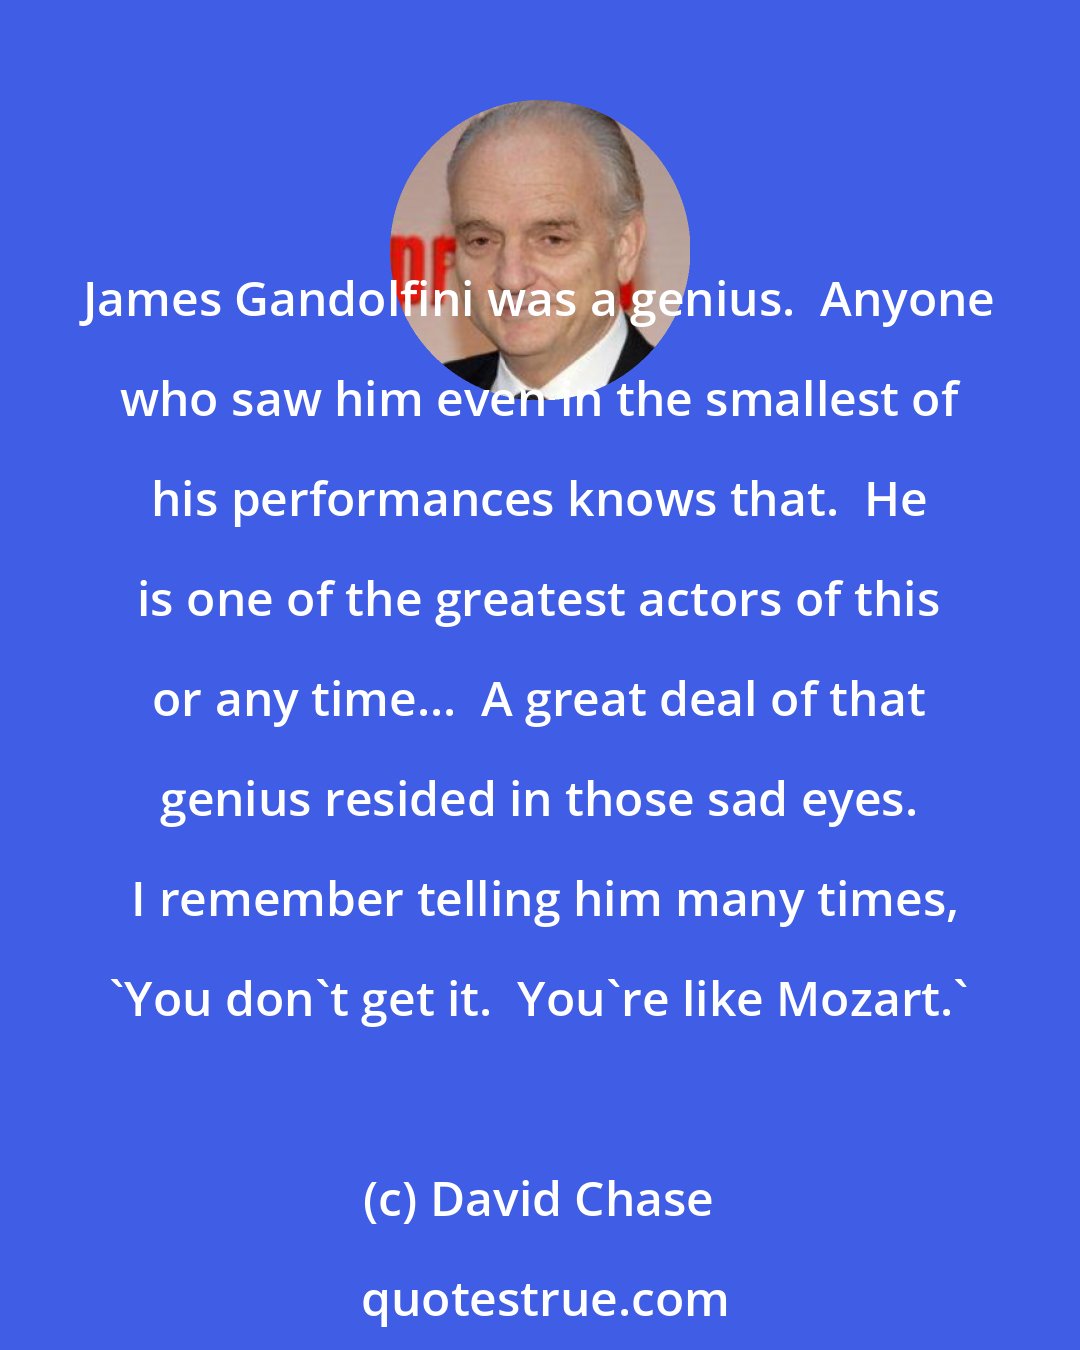 David Chase: James Gandolfini was a genius.  Anyone who saw him even in the smallest of his performances knows that.  He is one of the greatest actors of this or any time...  A great deal of that genius resided in those sad eyes.  I remember telling him many times, 'You don't get it.  You're like Mozart.'